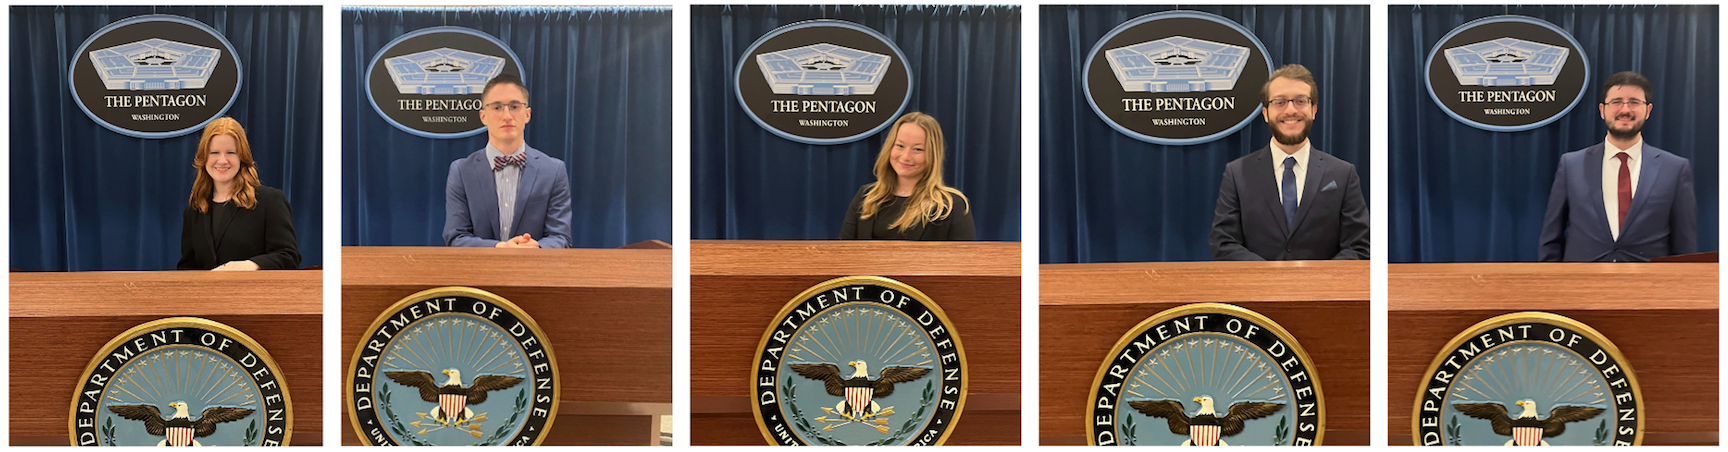 "Students present at the Pentagon"